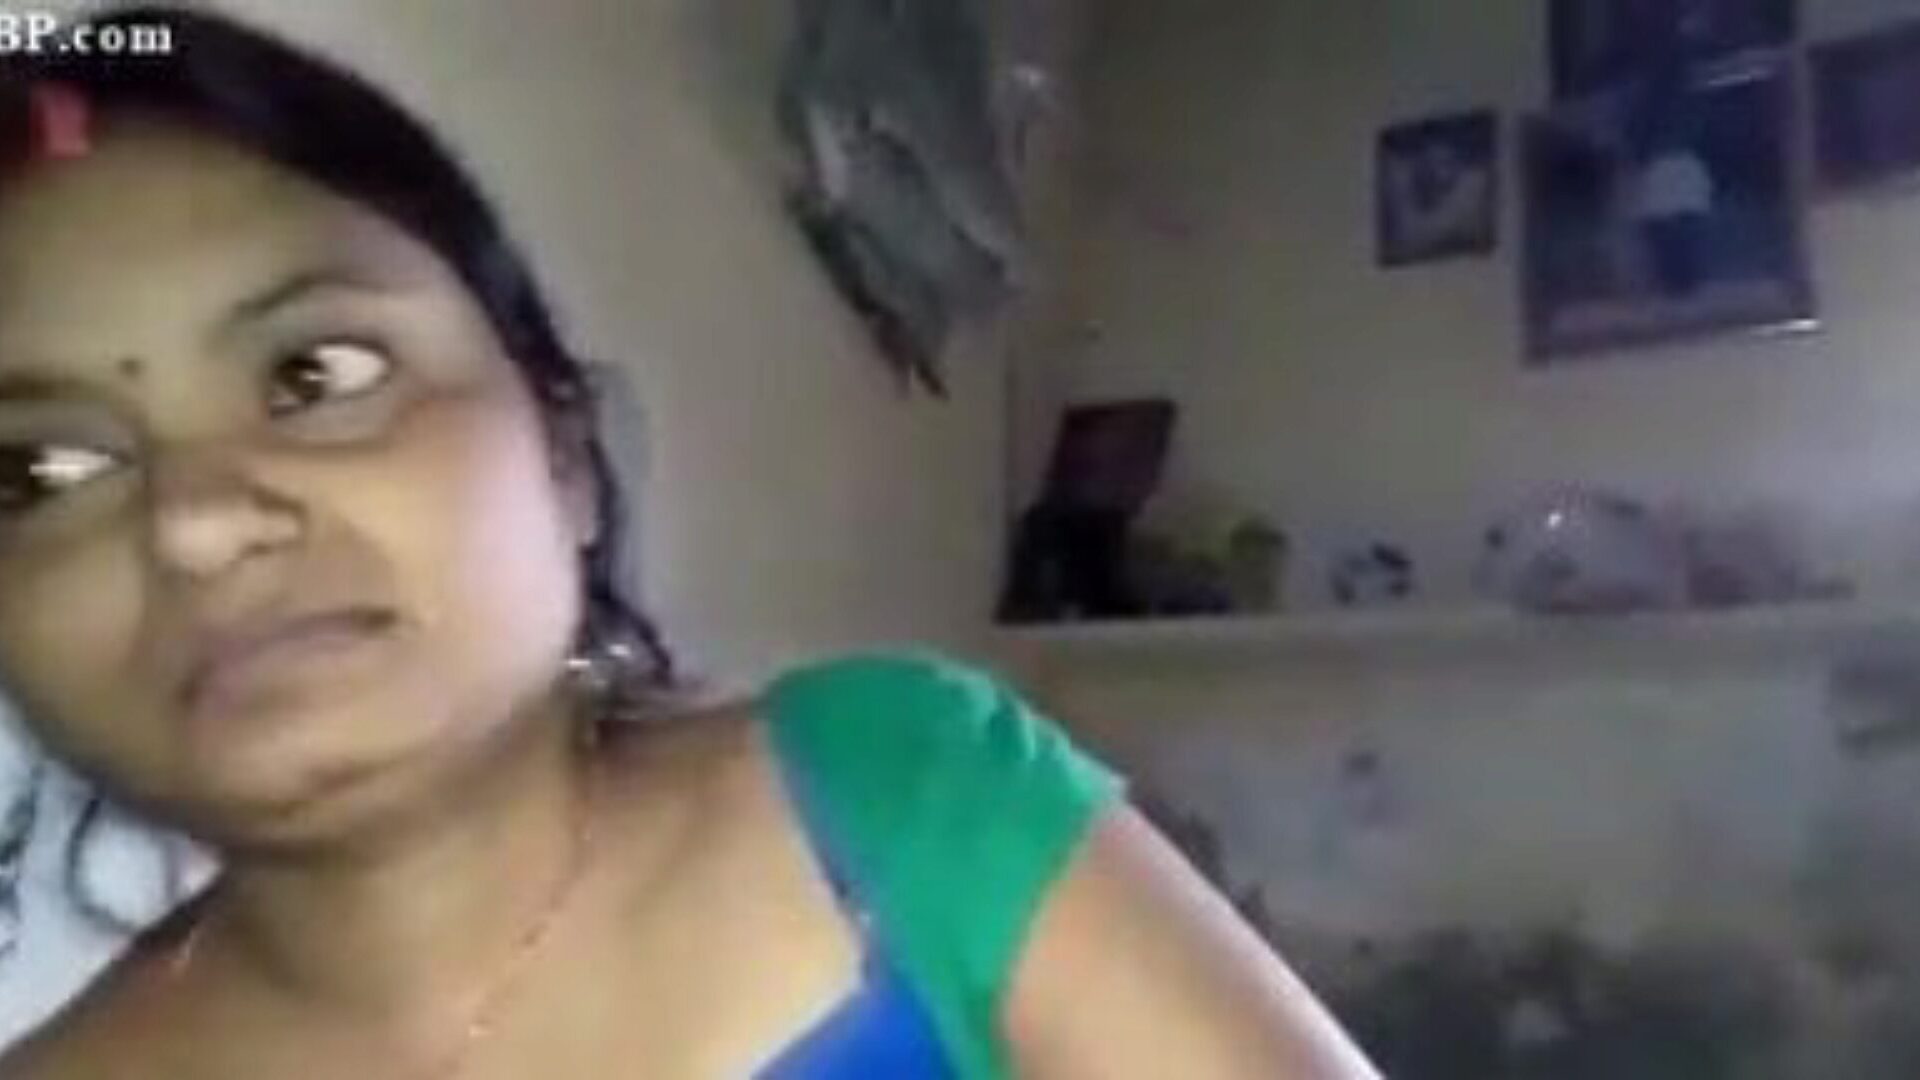 Desi Village Bhabhi with Husband Gives Blowjob and... Watch Desi Village Bhabhi with Husband Gives Blowjob and Handjob movie on xHamster - the ultimate collection of free Indian Village Tube porno tube vids